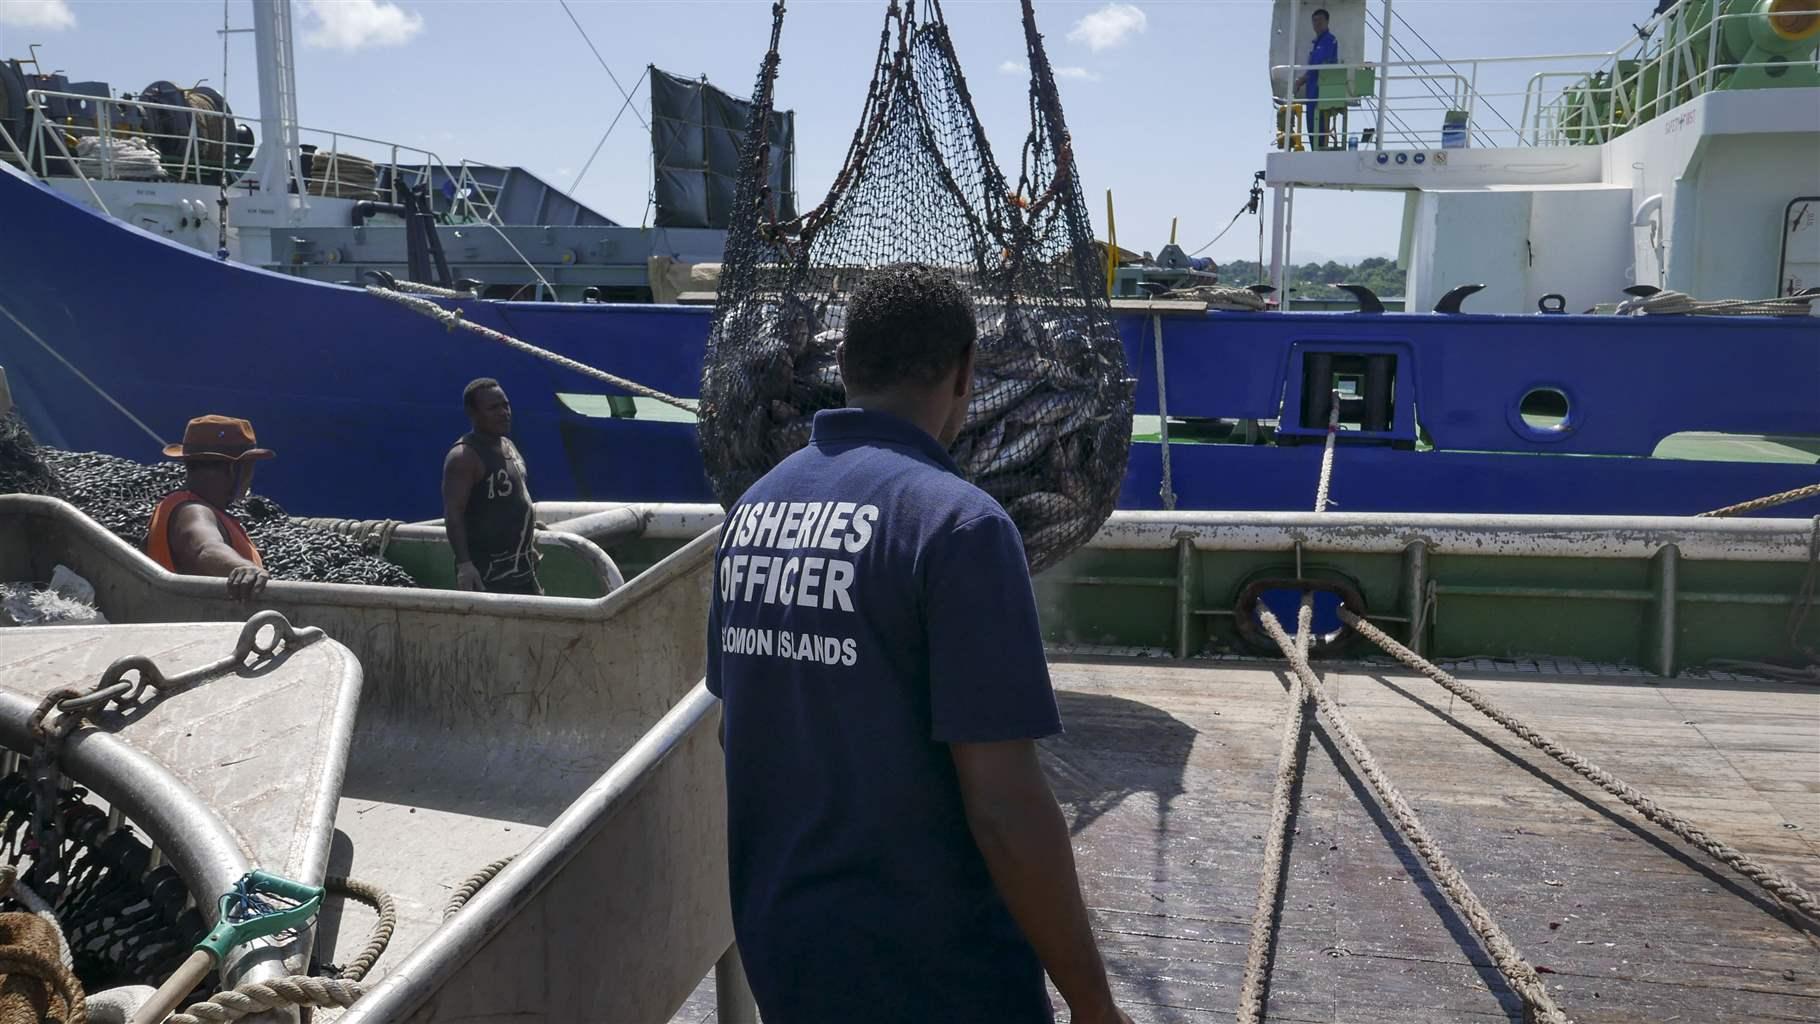 On a sunny day with small puffy clouds in the sky, a man wearing a shirt that says “Fisheries Officer, Solomon Islands” on the back stands on the deck of a large boat, observing as a crane swings a huge net full of fish onto the deck from an adjacent boat, which is large and blue and white. Two other men—one in a grey tank top and the other in a red sun hat and red tank top—look on.